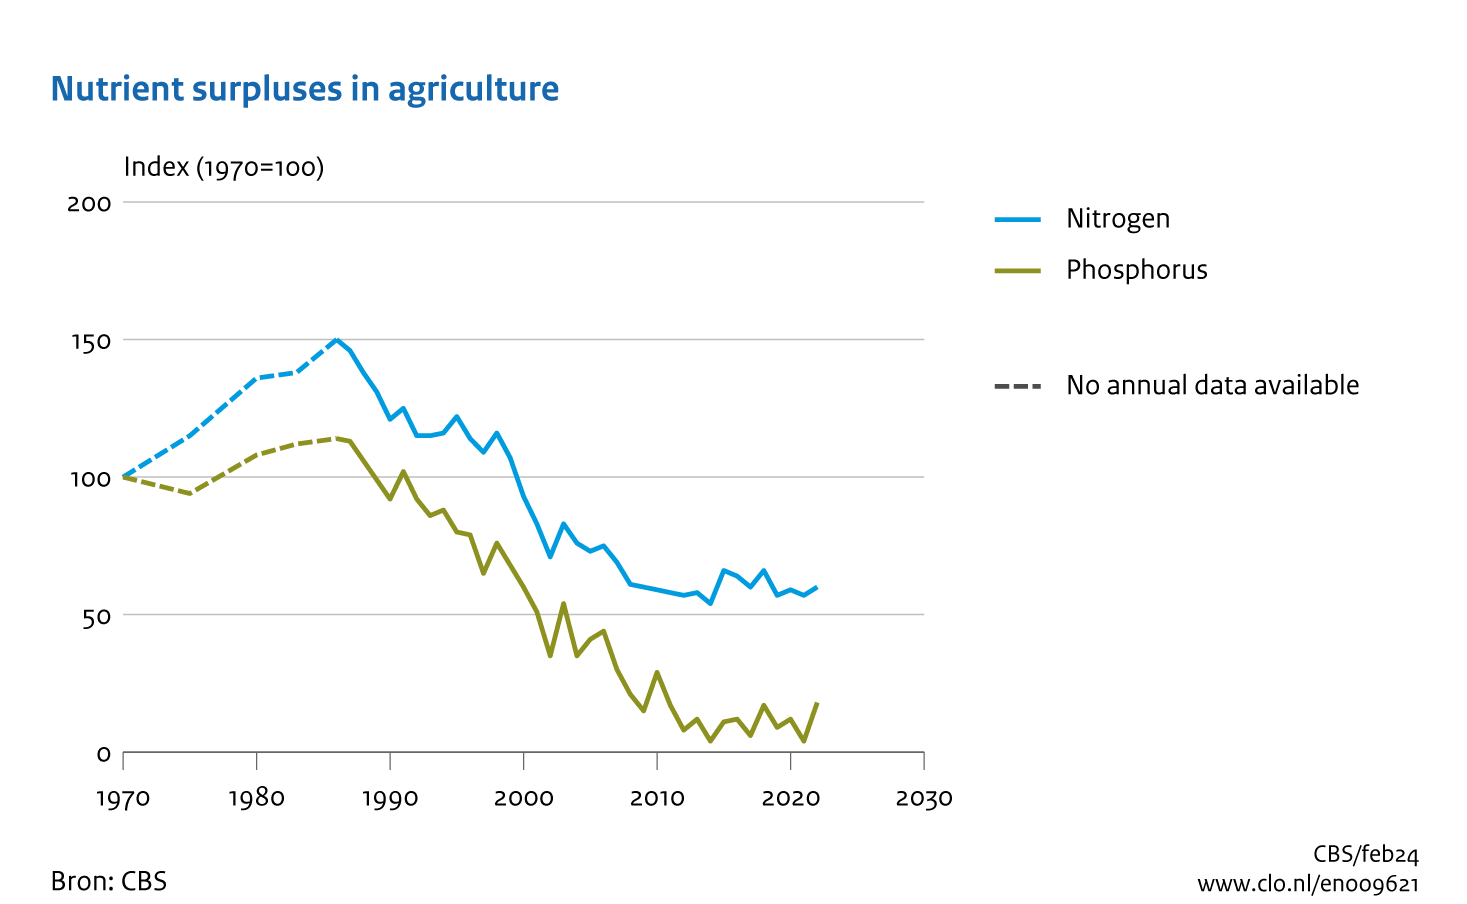 Between 1970 and 2022, the nitrogen surplus in agriculture has fallen by about 40 percent. The surplus did not change a lot in the last ten years and we see a small undulating trend depending on weather conditions. Compared to 2021, the surplus has increased by 5 percent in 2022. The surplus of phosphorus has nearly disappeared in recent years.